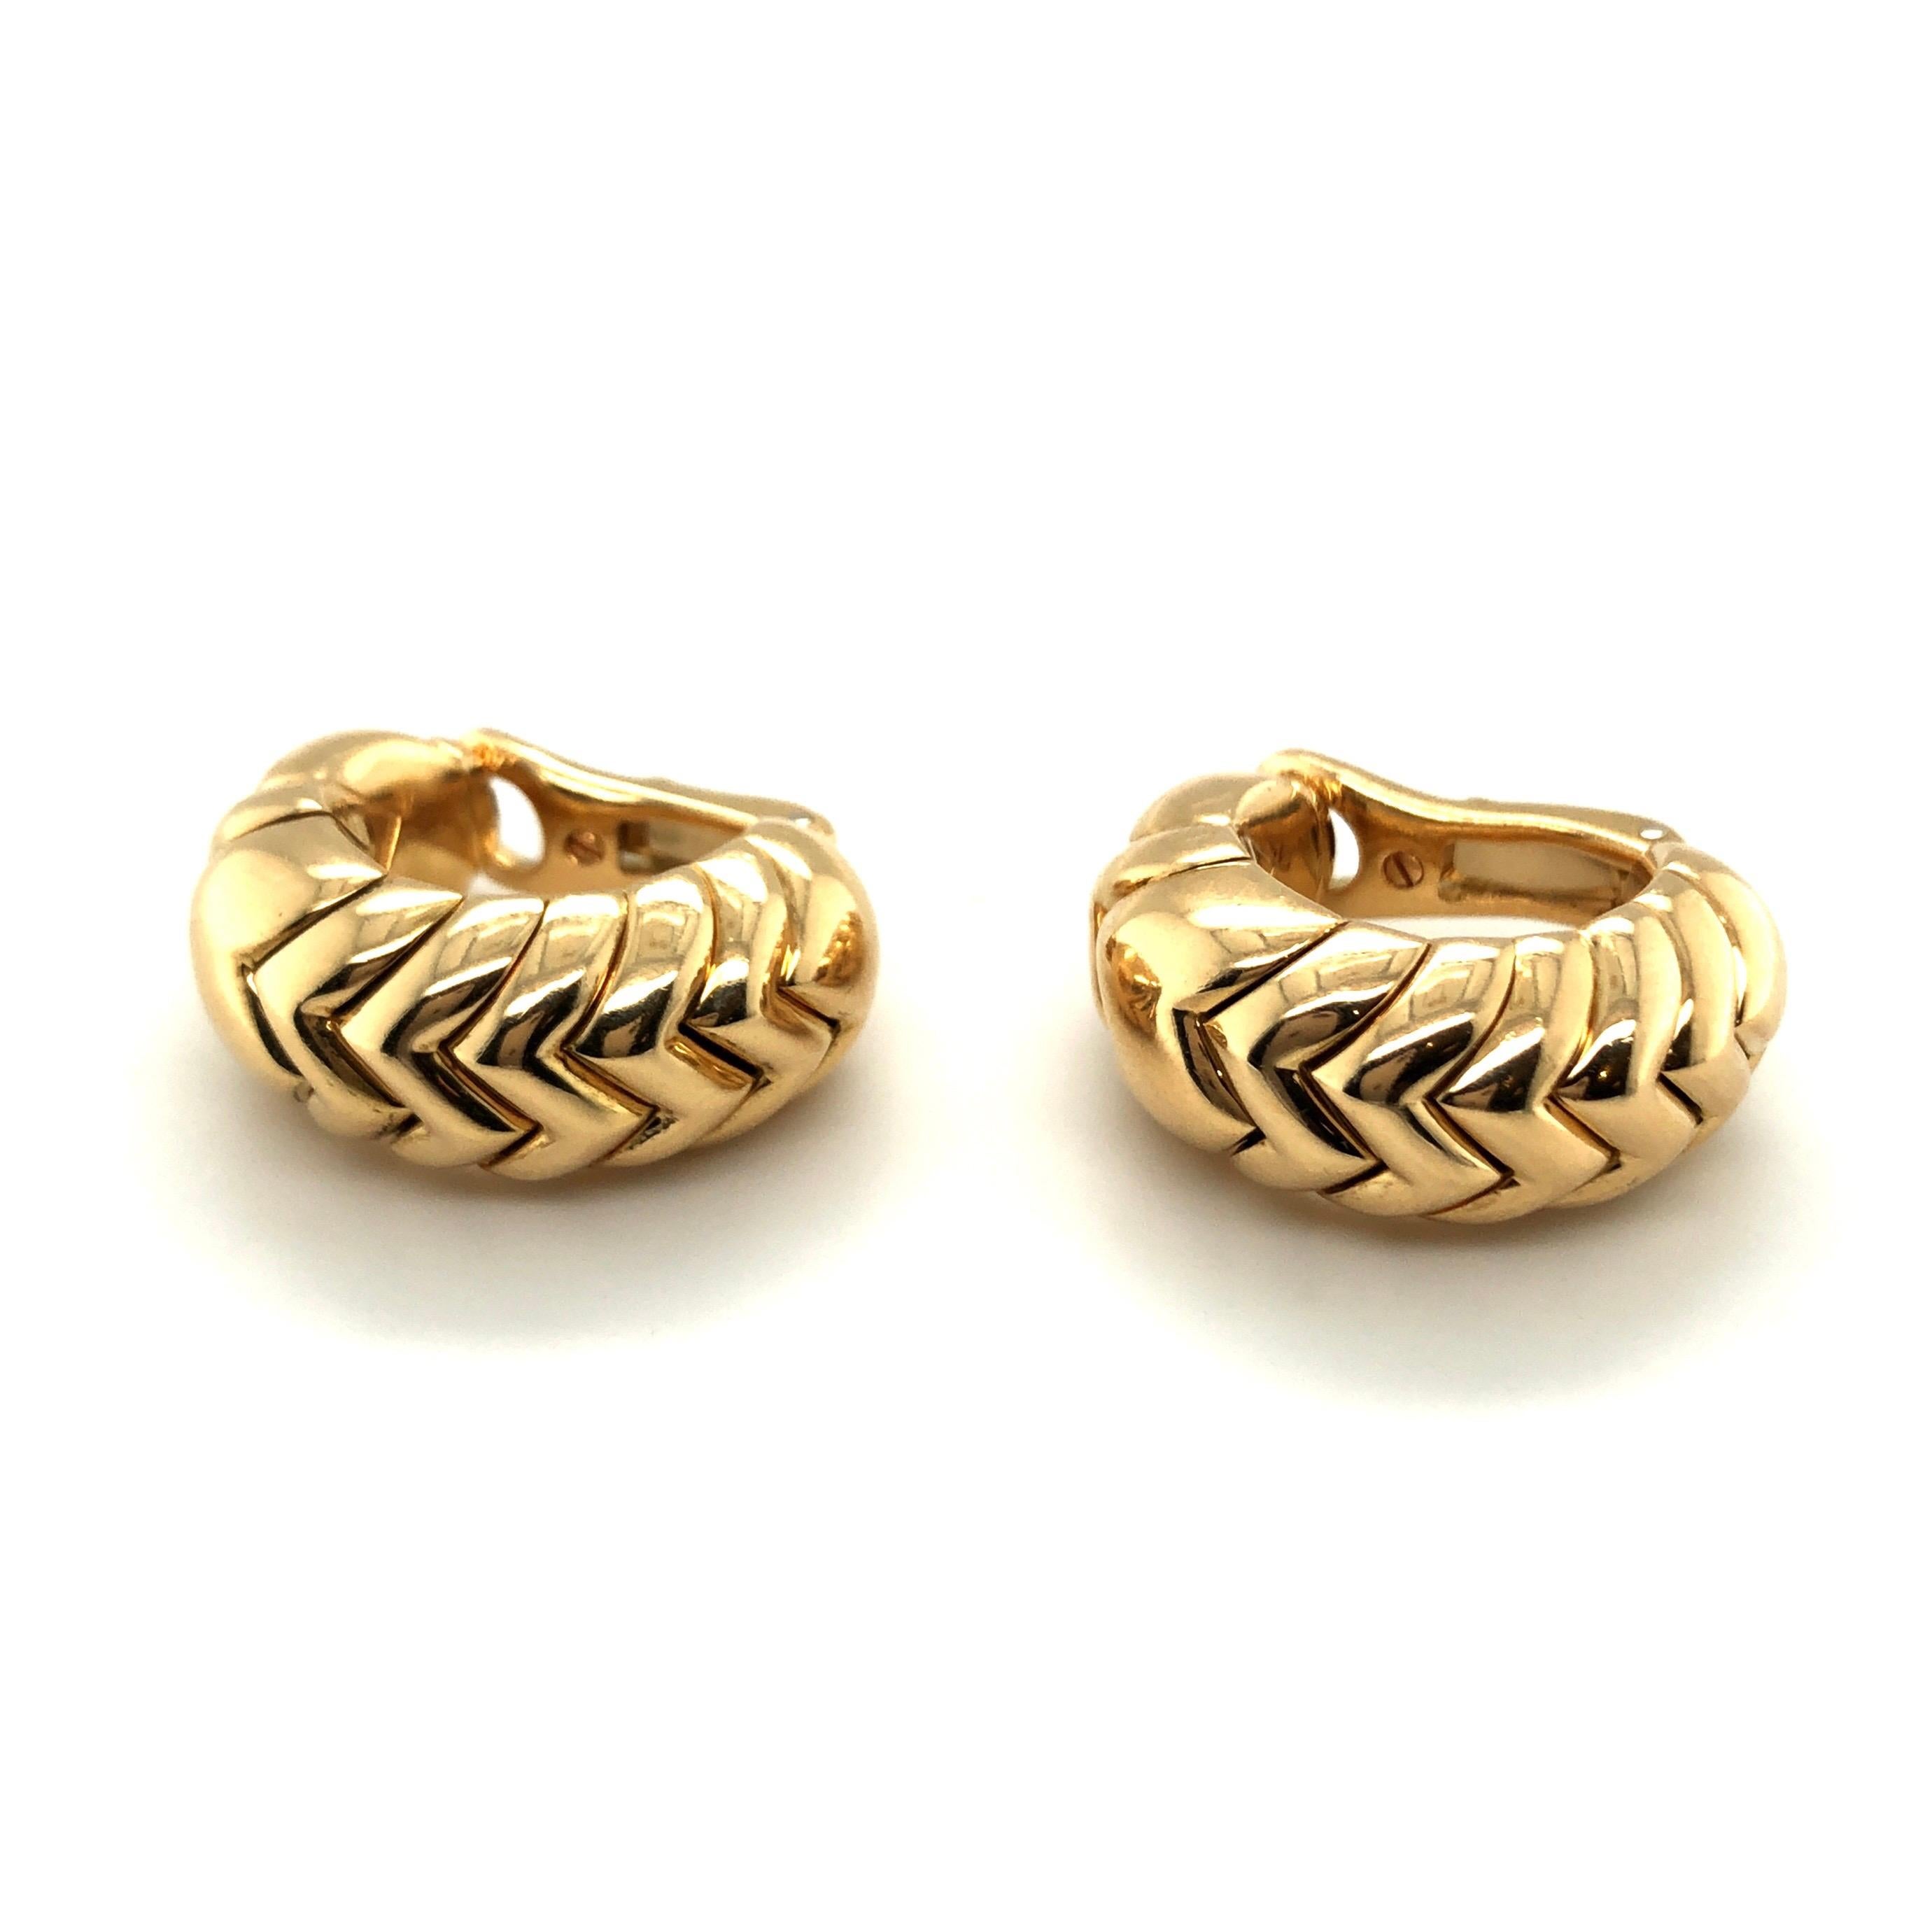 Elegant pair of 18 karat yellow gold Spiga earrings by Bvlgari.
Each half-hoop designed as a series of interlocking polished gold links fashioned into a zig-zag pattern. They are light and comfortable to wear day and night. Spiga was one of